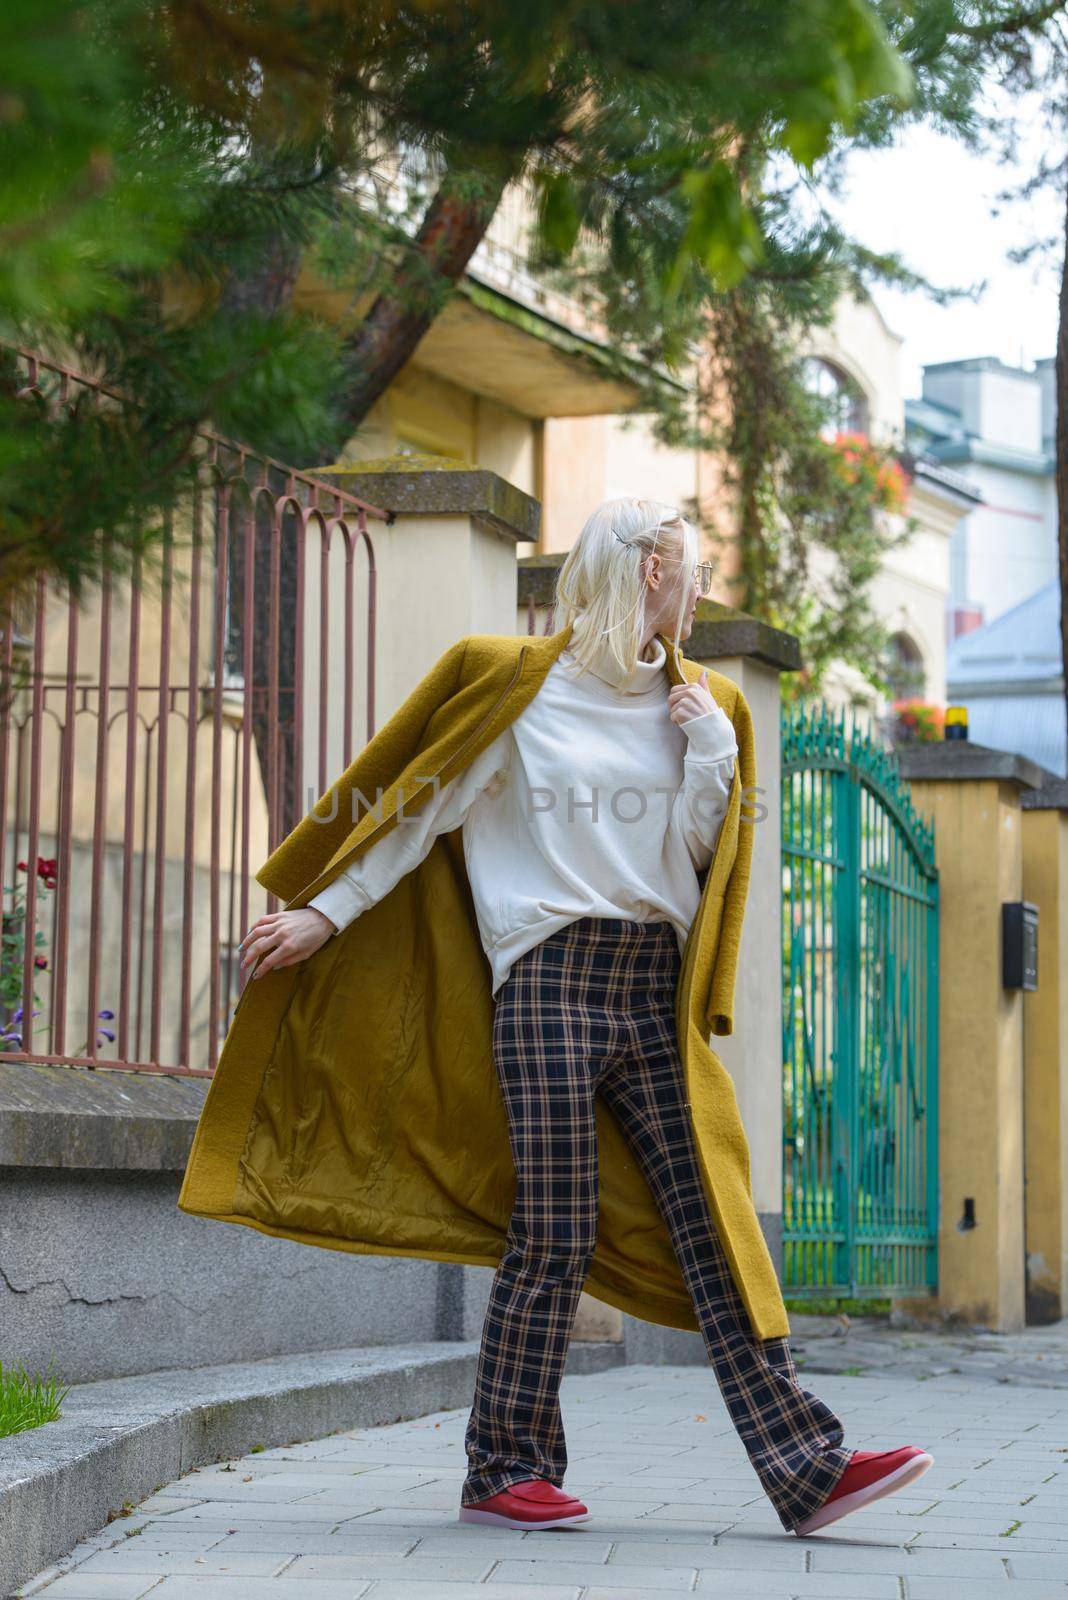 Fashionable beautiful young woman with blond hair in a stylish long coat, checkered pants, red shoes and glasses poses in the city streets. by Ashtray25